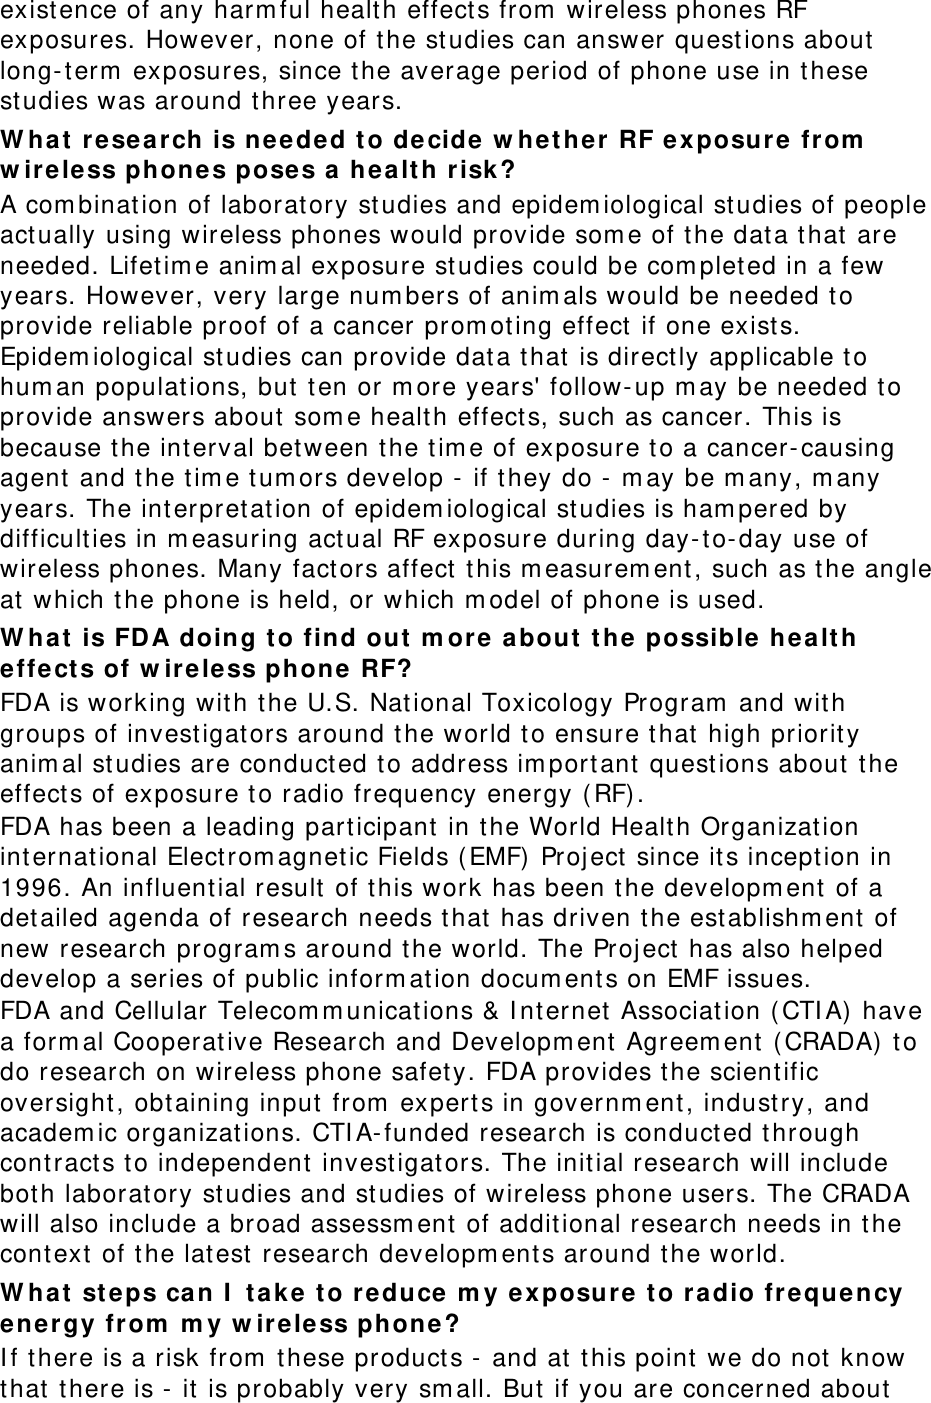 exist ence of any harm ful health effect s from  wireless phones RF exposures. However, none of t he studies can answer quest ions about long- t erm  exposures, since t he average period of phone use in t hese studies was around t hree years. W ha t r e sea rch is neede d t o decide w het he r  RF e x posur e  from  w ir e less phones poses a healt h r isk ? A com bination of laboratory studies and epidem iological st udies of people act ually using wireless phones would provide som e of t he data t hat are needed. Lifetim e anim al exposure st udies could be com plet ed in a few years. However, very large num bers of anim als would be needed t o provide reliable proof of a cancer prom ot ing effect  if one exist s. Epidem iological st udies can provide dat a t hat is direct ly applicable t o hum an populations, but  t en or m ore years&apos; follow- up m ay be needed t o provide answers about  som e health effect s, such as cancer. This is because the int erval between t he tim e of exposure t o a cancer- causing agent  and t he tim e tum ors develop -  if they do -  m ay be m any, m any years. The interpret at ion of epidem iological st udies is ham pered by difficult ies in m easuring actual RF exposure during day- t o-day use of wireless phones. Many fact ors affect  t his m easurem ent , such as t he angle at which t he phone is held, or which m odel of phone is used. W ha t is FD A doing t o find ou t  m ore a bout  t he possible  healt h effe cts of w ireless phone RF? FDA is working wit h the U.S. National Toxicology Program  and with groups of invest igators around t he world t o ensure t hat high priorit y anim al studies are conduct ed t o address im port ant  quest ions about  t he effect s of exposure t o radio frequency energy ( RF) . FDA has been a leading participant  in t he World Healt h Organization int ernational Electrom agnetic Fields ( EMF)  Project  since its inception in 1996. An influent ial result  of this work has been t he developm ent  of a detailed agenda of research needs t hat has driven t he est ablishm ent  of new research program s around t he world. The Proj ect  has also helped develop a series of public inform ation docum ent s on EMF issues. FDA and Cellular Telecom m unications &amp; I nt ernet  Association ( CTI A)  have a form al Cooperative Research and Developm ent  Agreem ent  ( CRADA)  t o do research on wireless phone safet y. FDA provides t he scient ific oversight , obt aining input from  expert s in governm ent, indust ry, and academ ic organizations. CTI A- funded research is conducted t hrough cont ract s t o independent  invest igators. The initial research will include both laboratory studies and st udies of wireless phone users. The CRADA will also include a broad assessm ent  of additional research needs in t he cont ext  of the lat est  research developm ent s around t he world. W ha t steps can I  t a ke t o r e duce m y ex posure t o radio frequency ene rgy from  m y w ireless phone ? I f t here is a risk from  t hese product s -  and at t his point  we do not  know that t here is -  it  is probably very sm all. But  if you are concerned about  